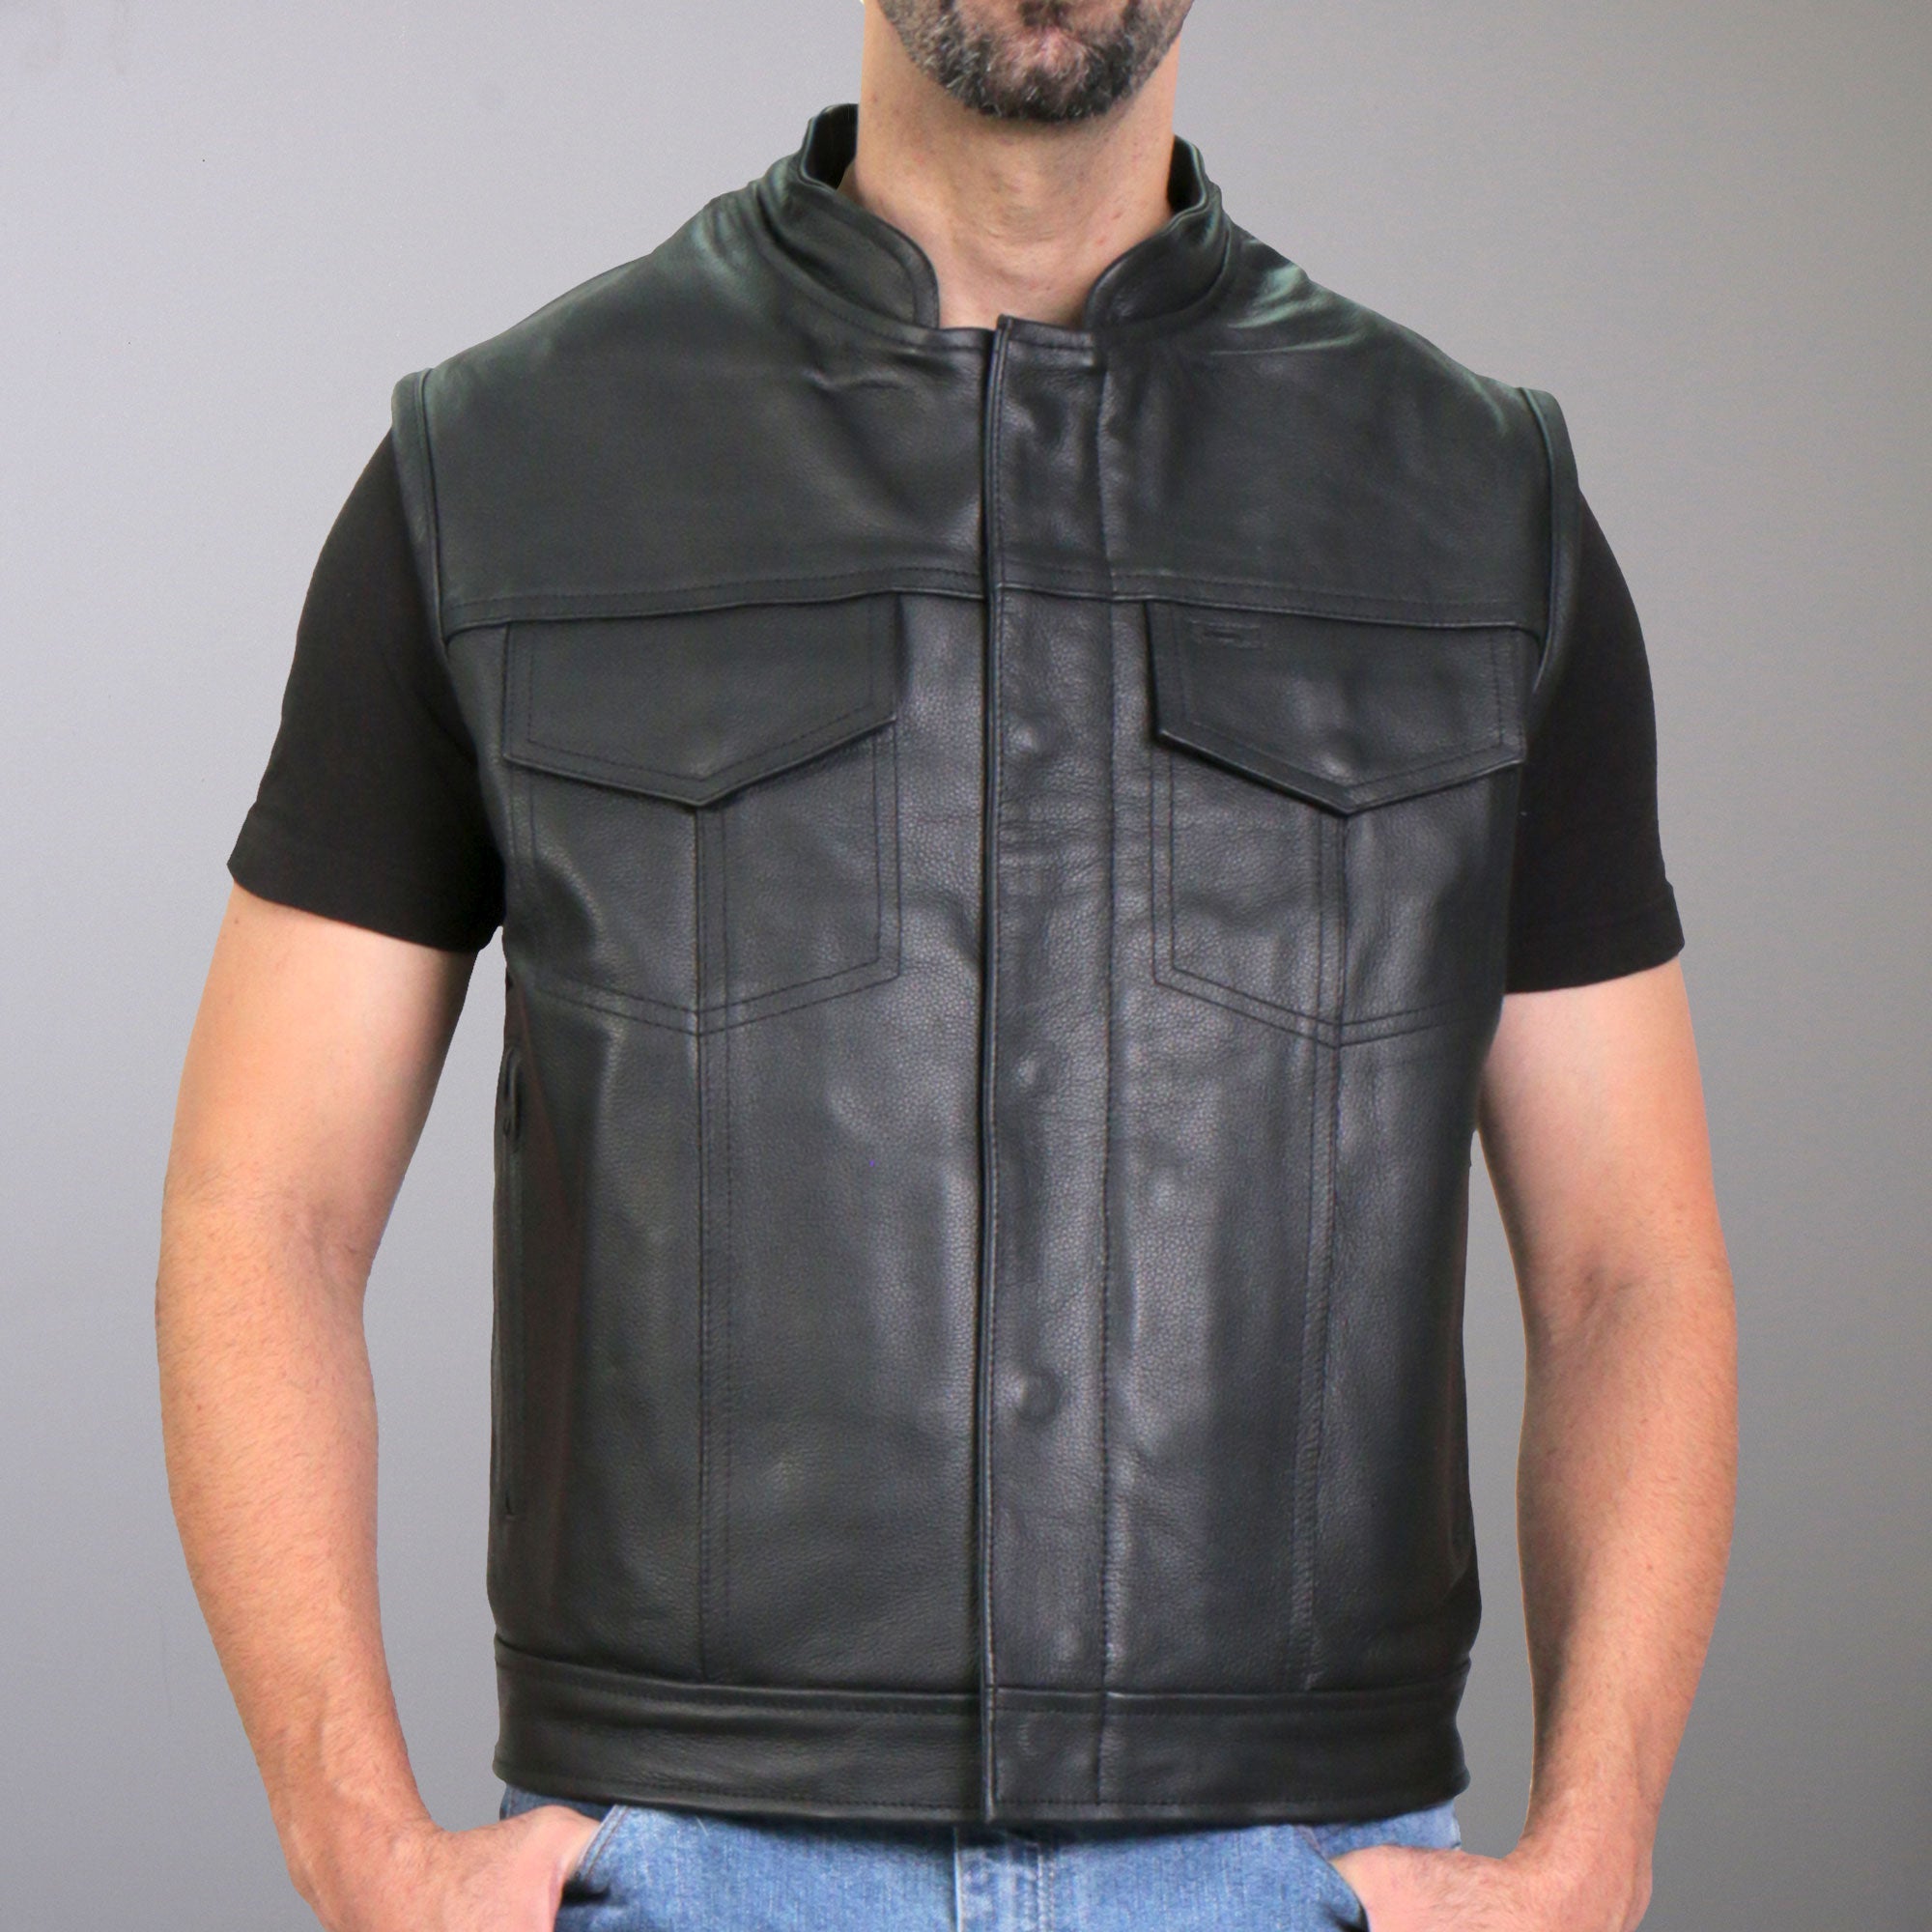 Hot Leathers VSM1060 Men's Black 'Flannel Red' Motorcycle Club Style Conceal and Carry Leather Biker Vest Black / L